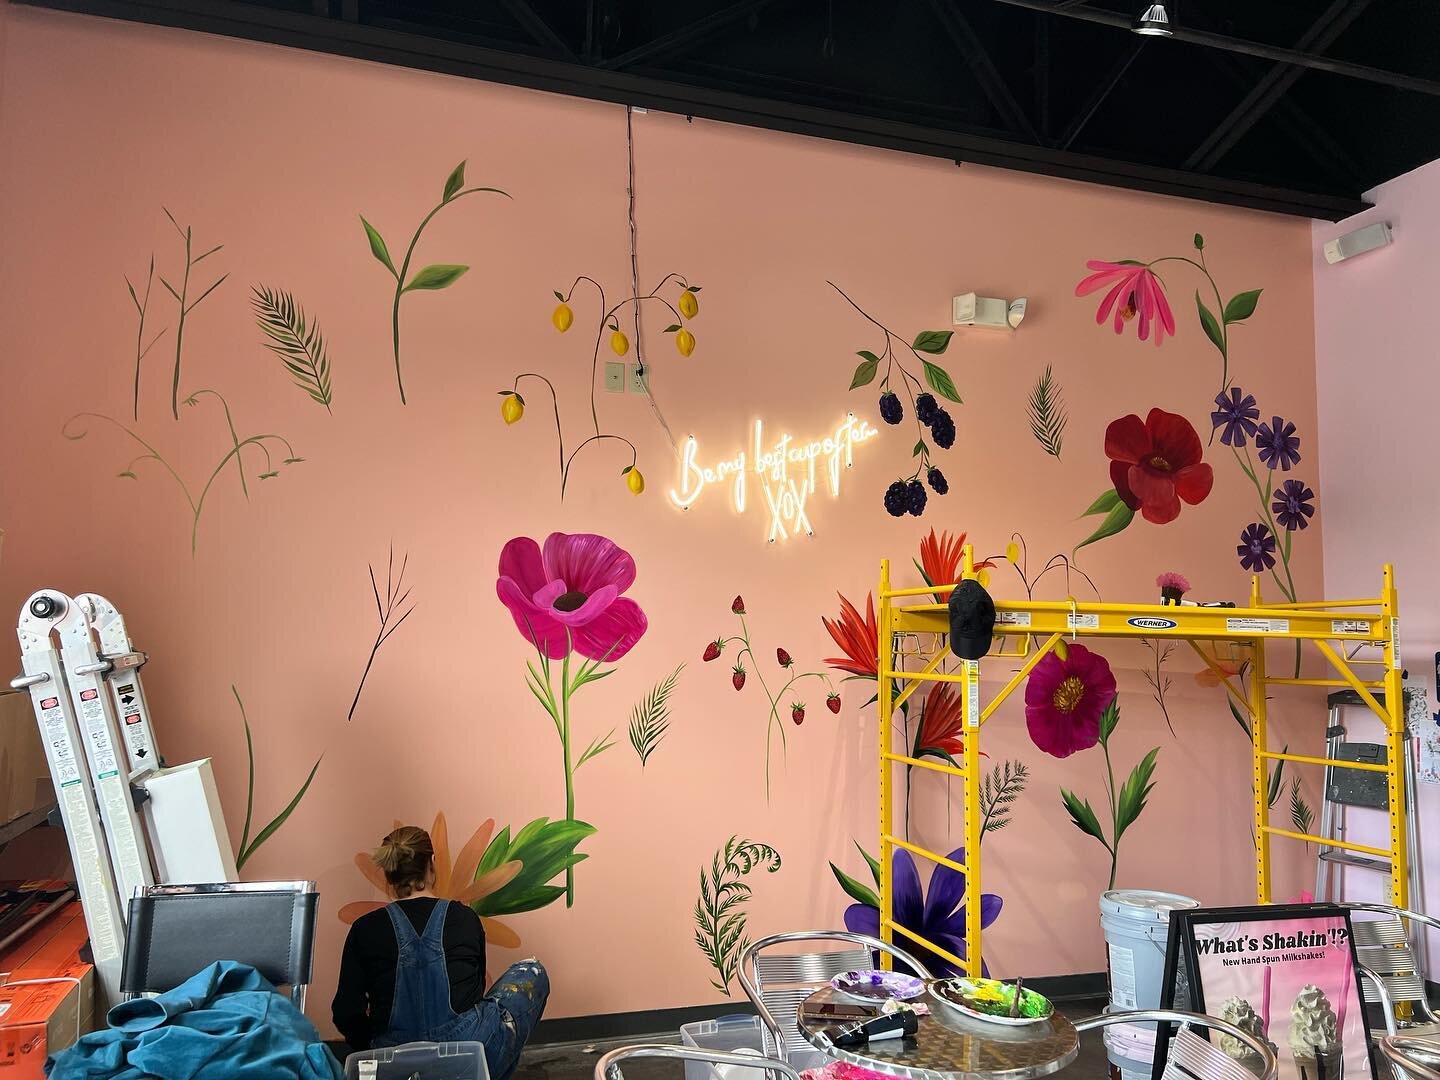 Our Brecksville store is open &amp; we have a beautiful mural being painted! Stop by and watch her paint! 🎨🌸🌻🌼

Painted by: 
@allisonpenceart